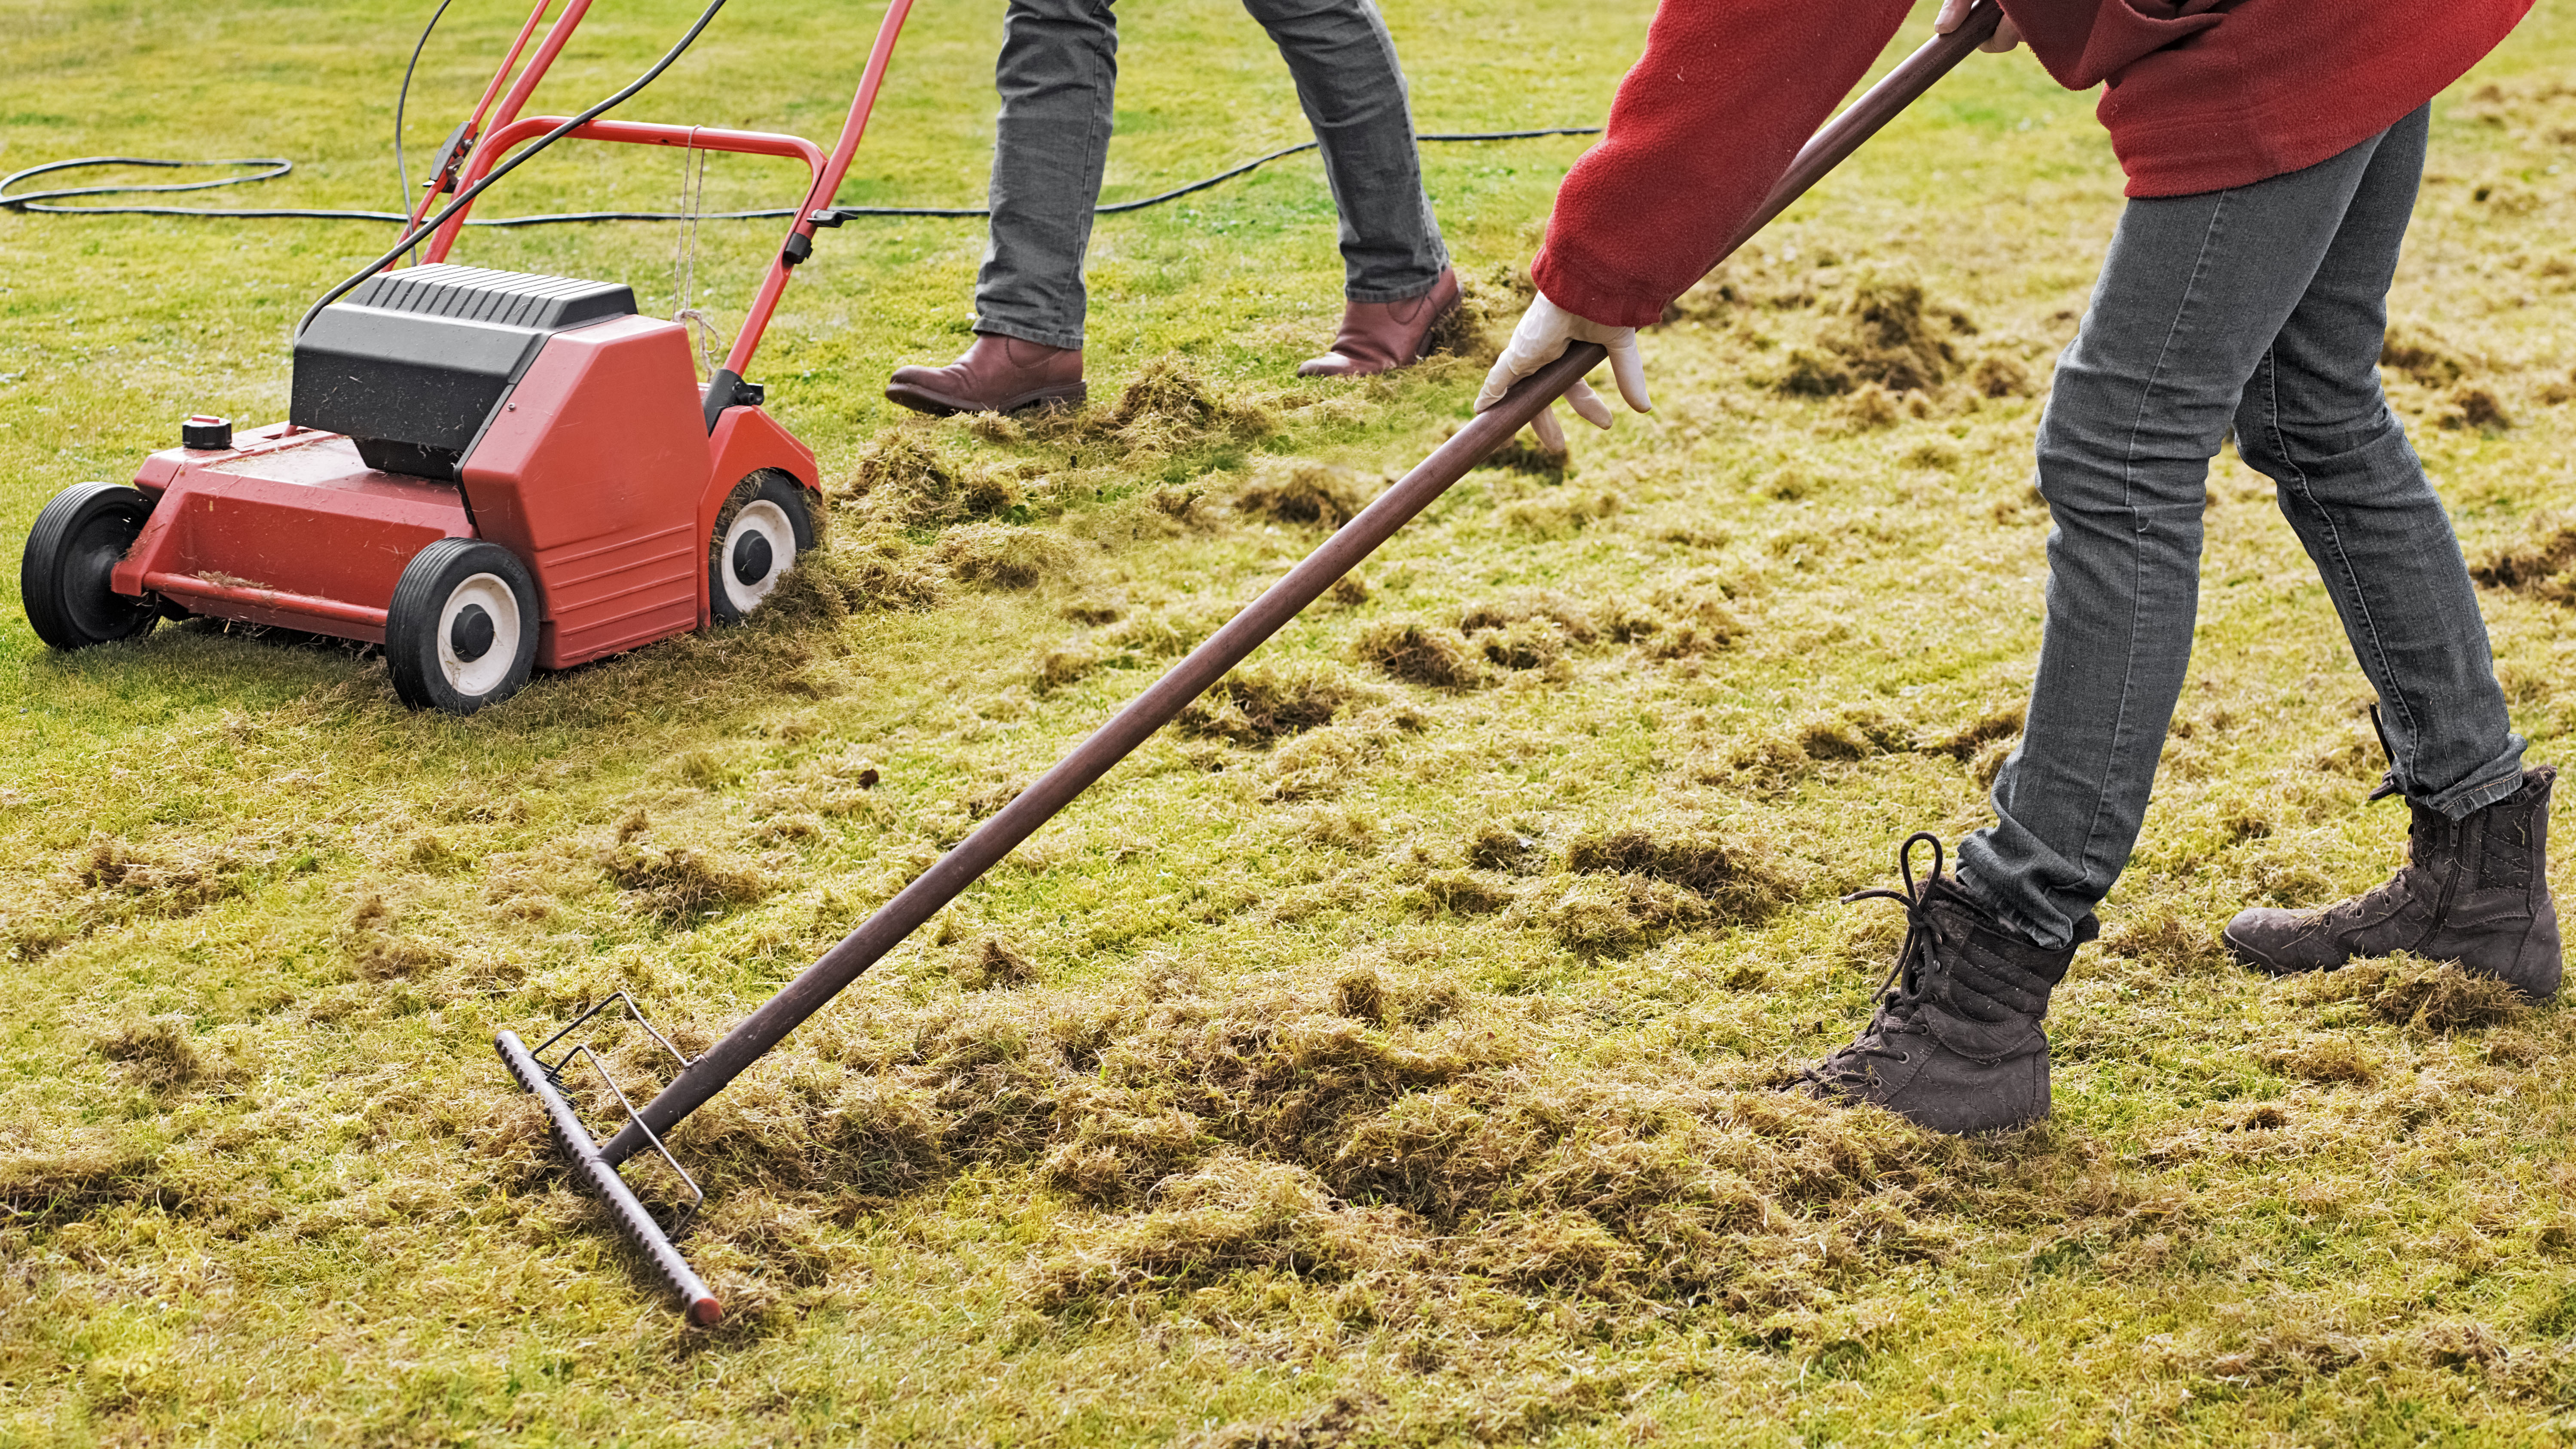 One person uses an electric screwdriver on the lawn while another collects loose straw with a rake